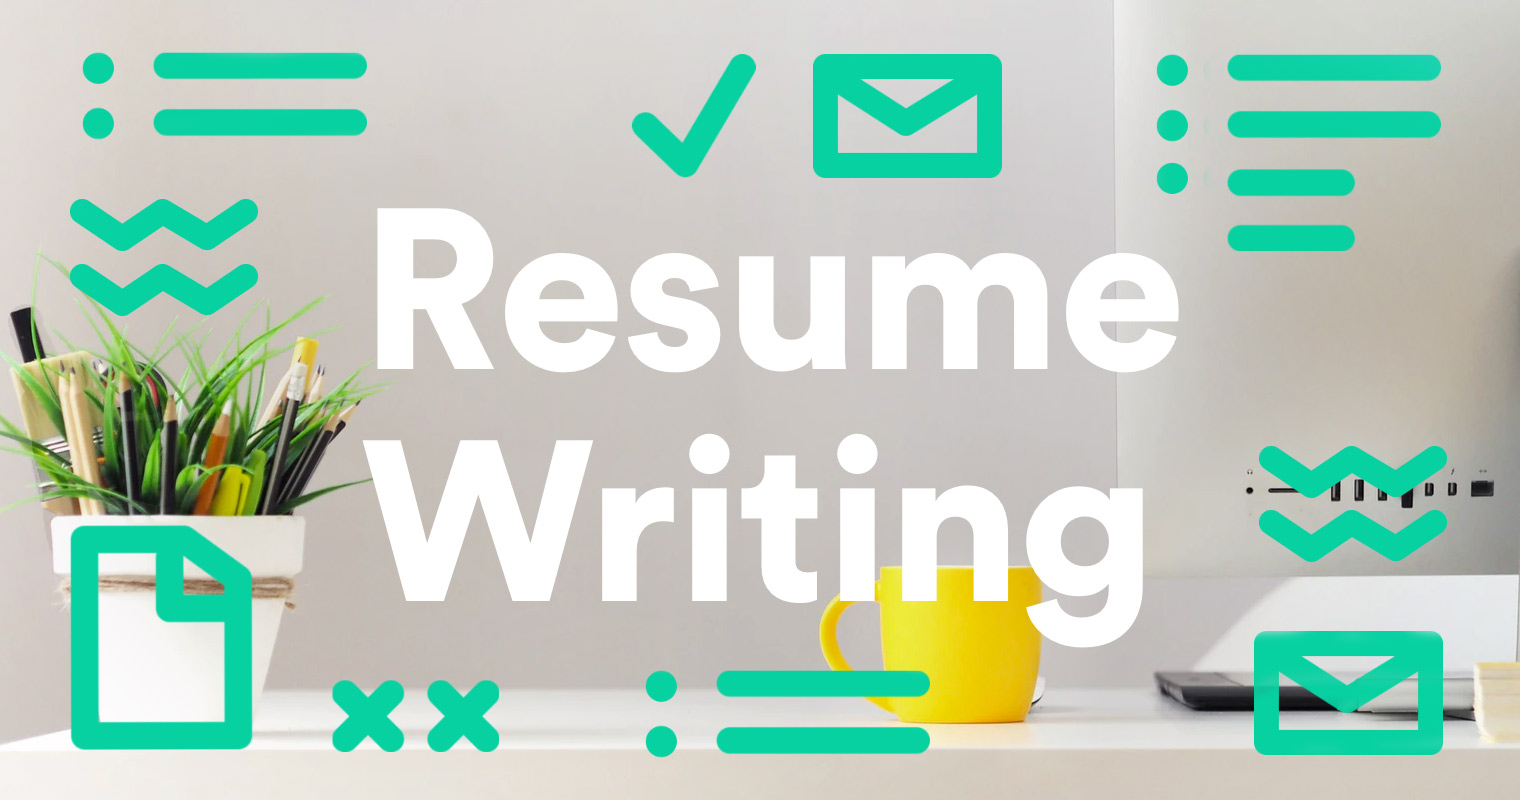 10 resume writing tips to help you land a job